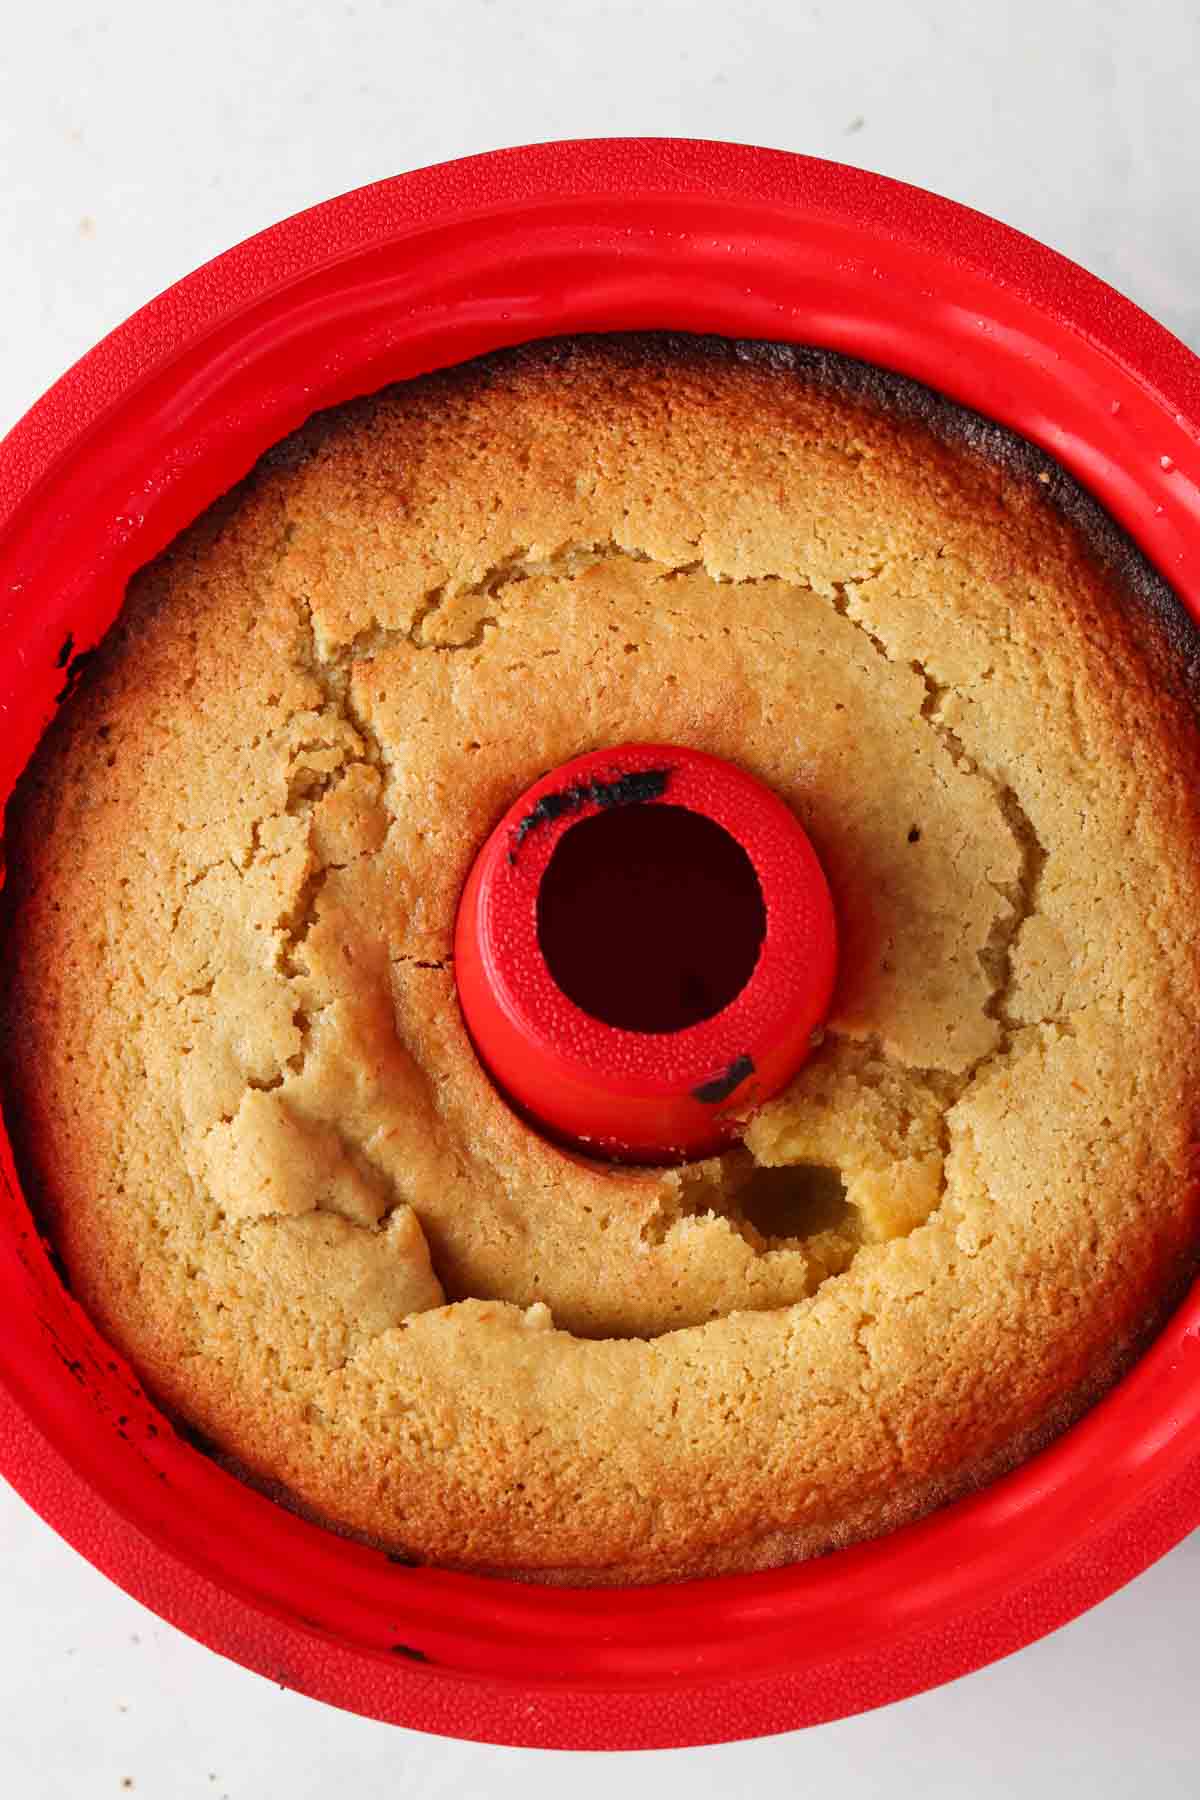 Baked lemon cake in a red silicone pan.